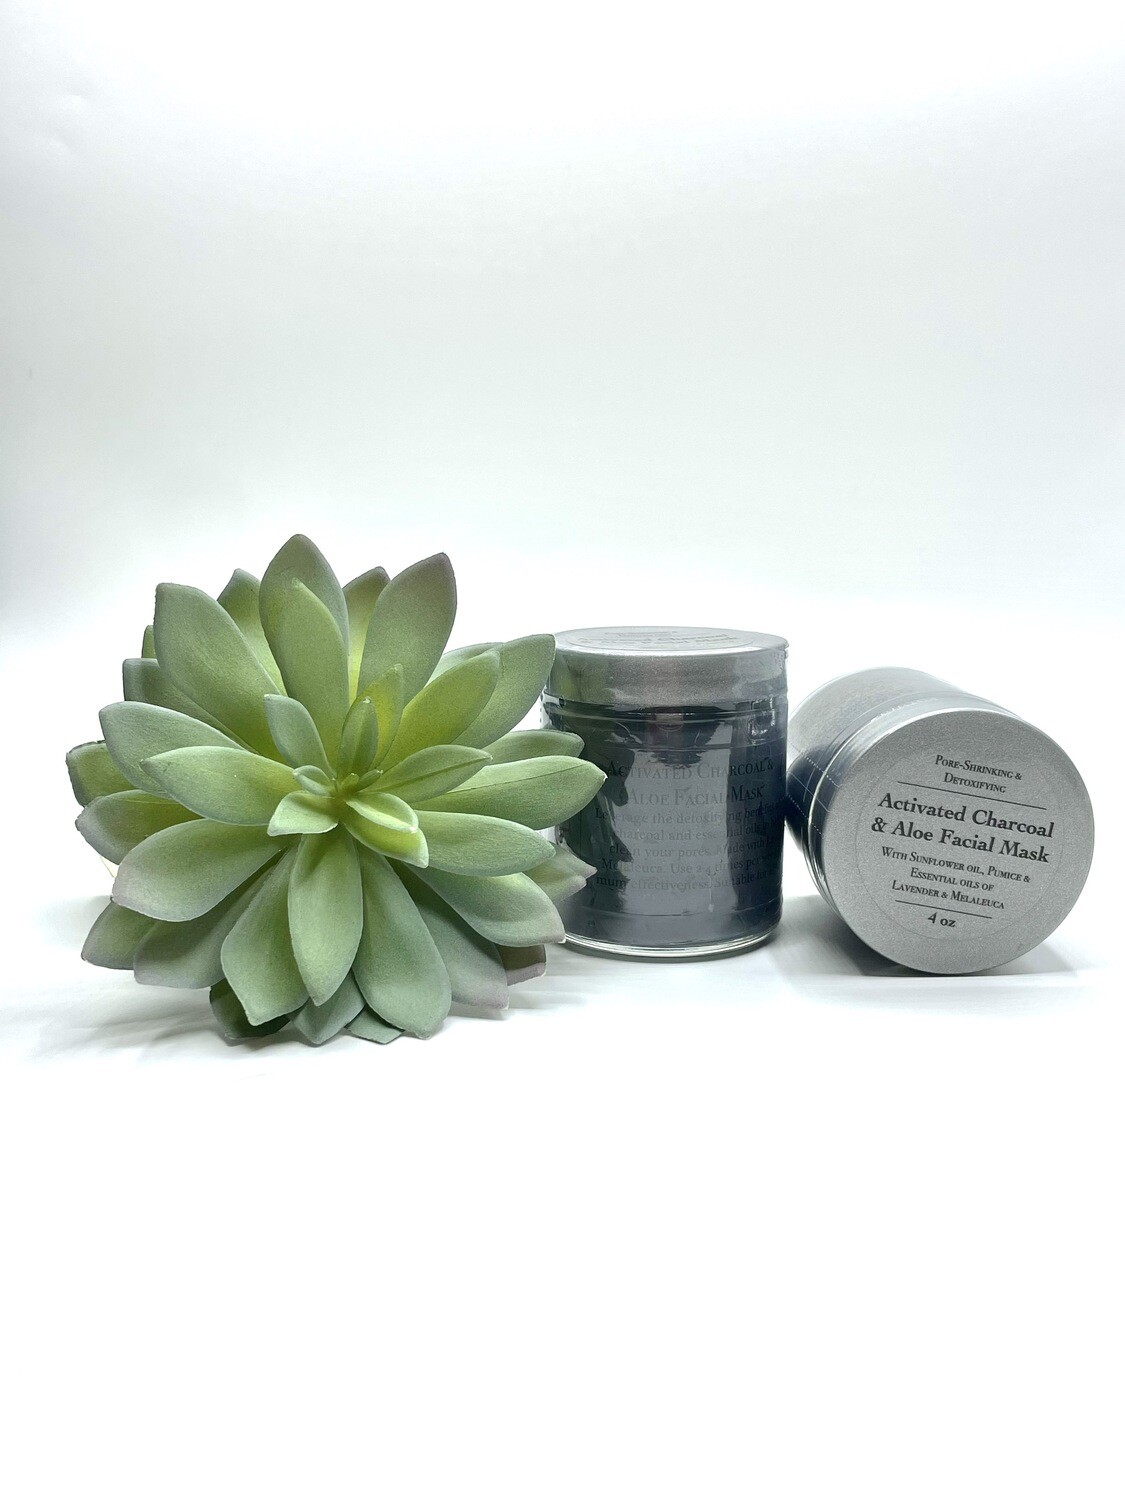 Activated Charcoal & Aloe Facial Mask